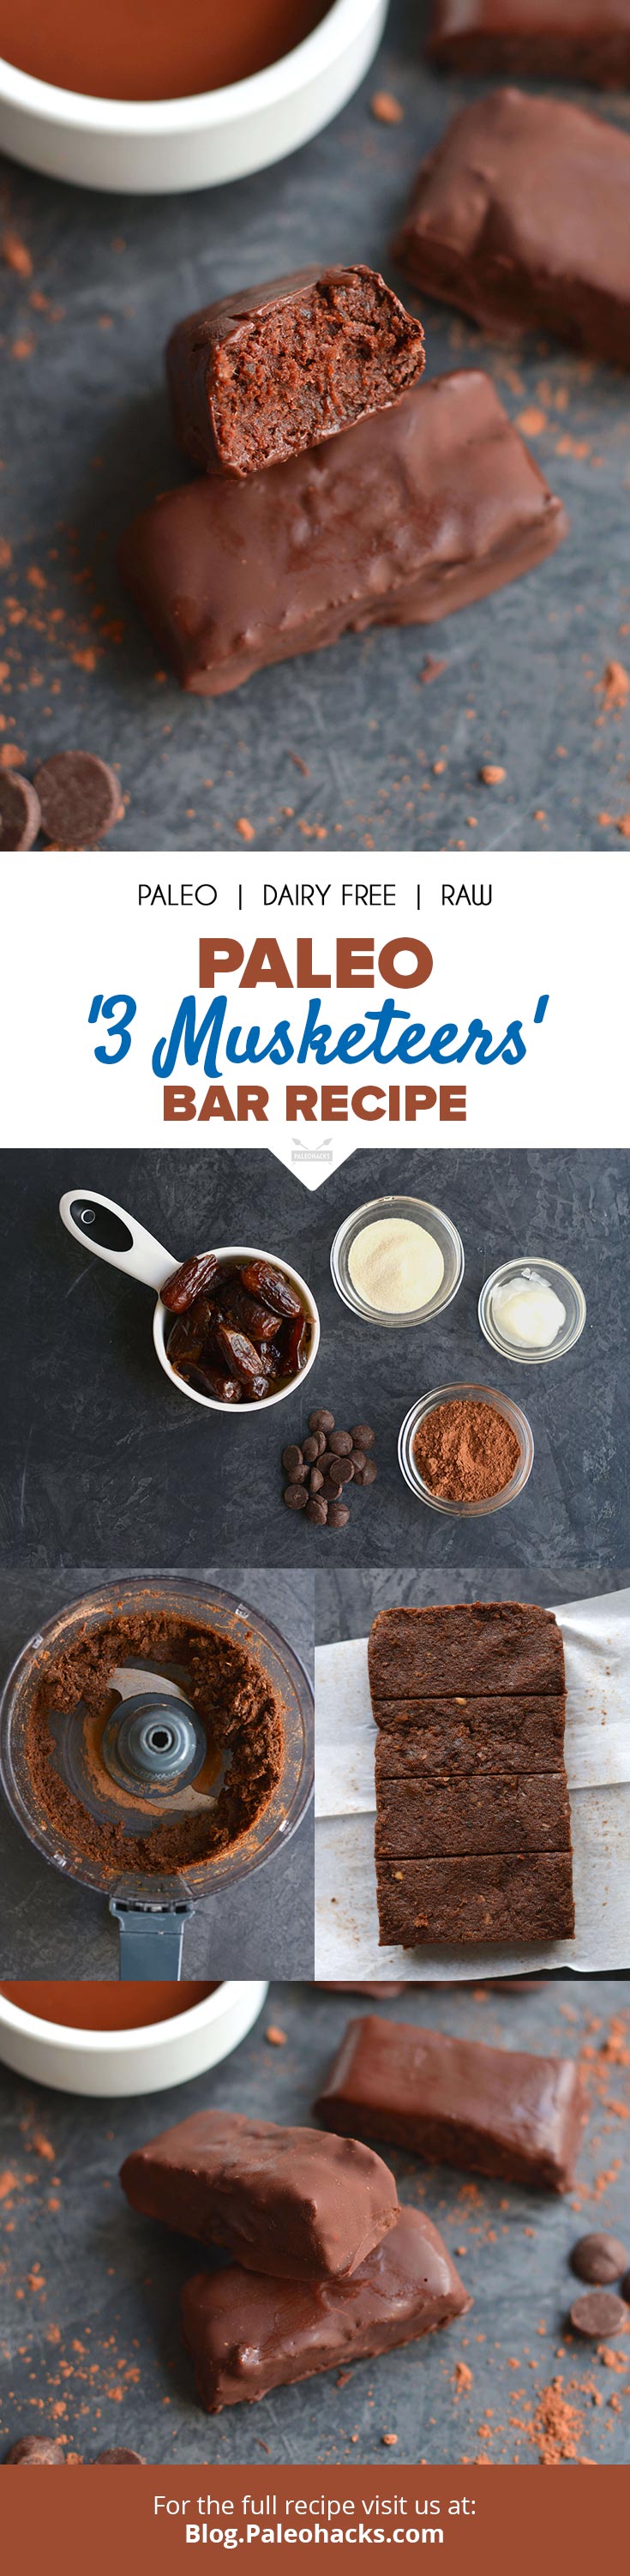 This copycat Musketeers Bar recipe gets transformed into a better-for-you treat with just five Paleo-friendly ingredients.